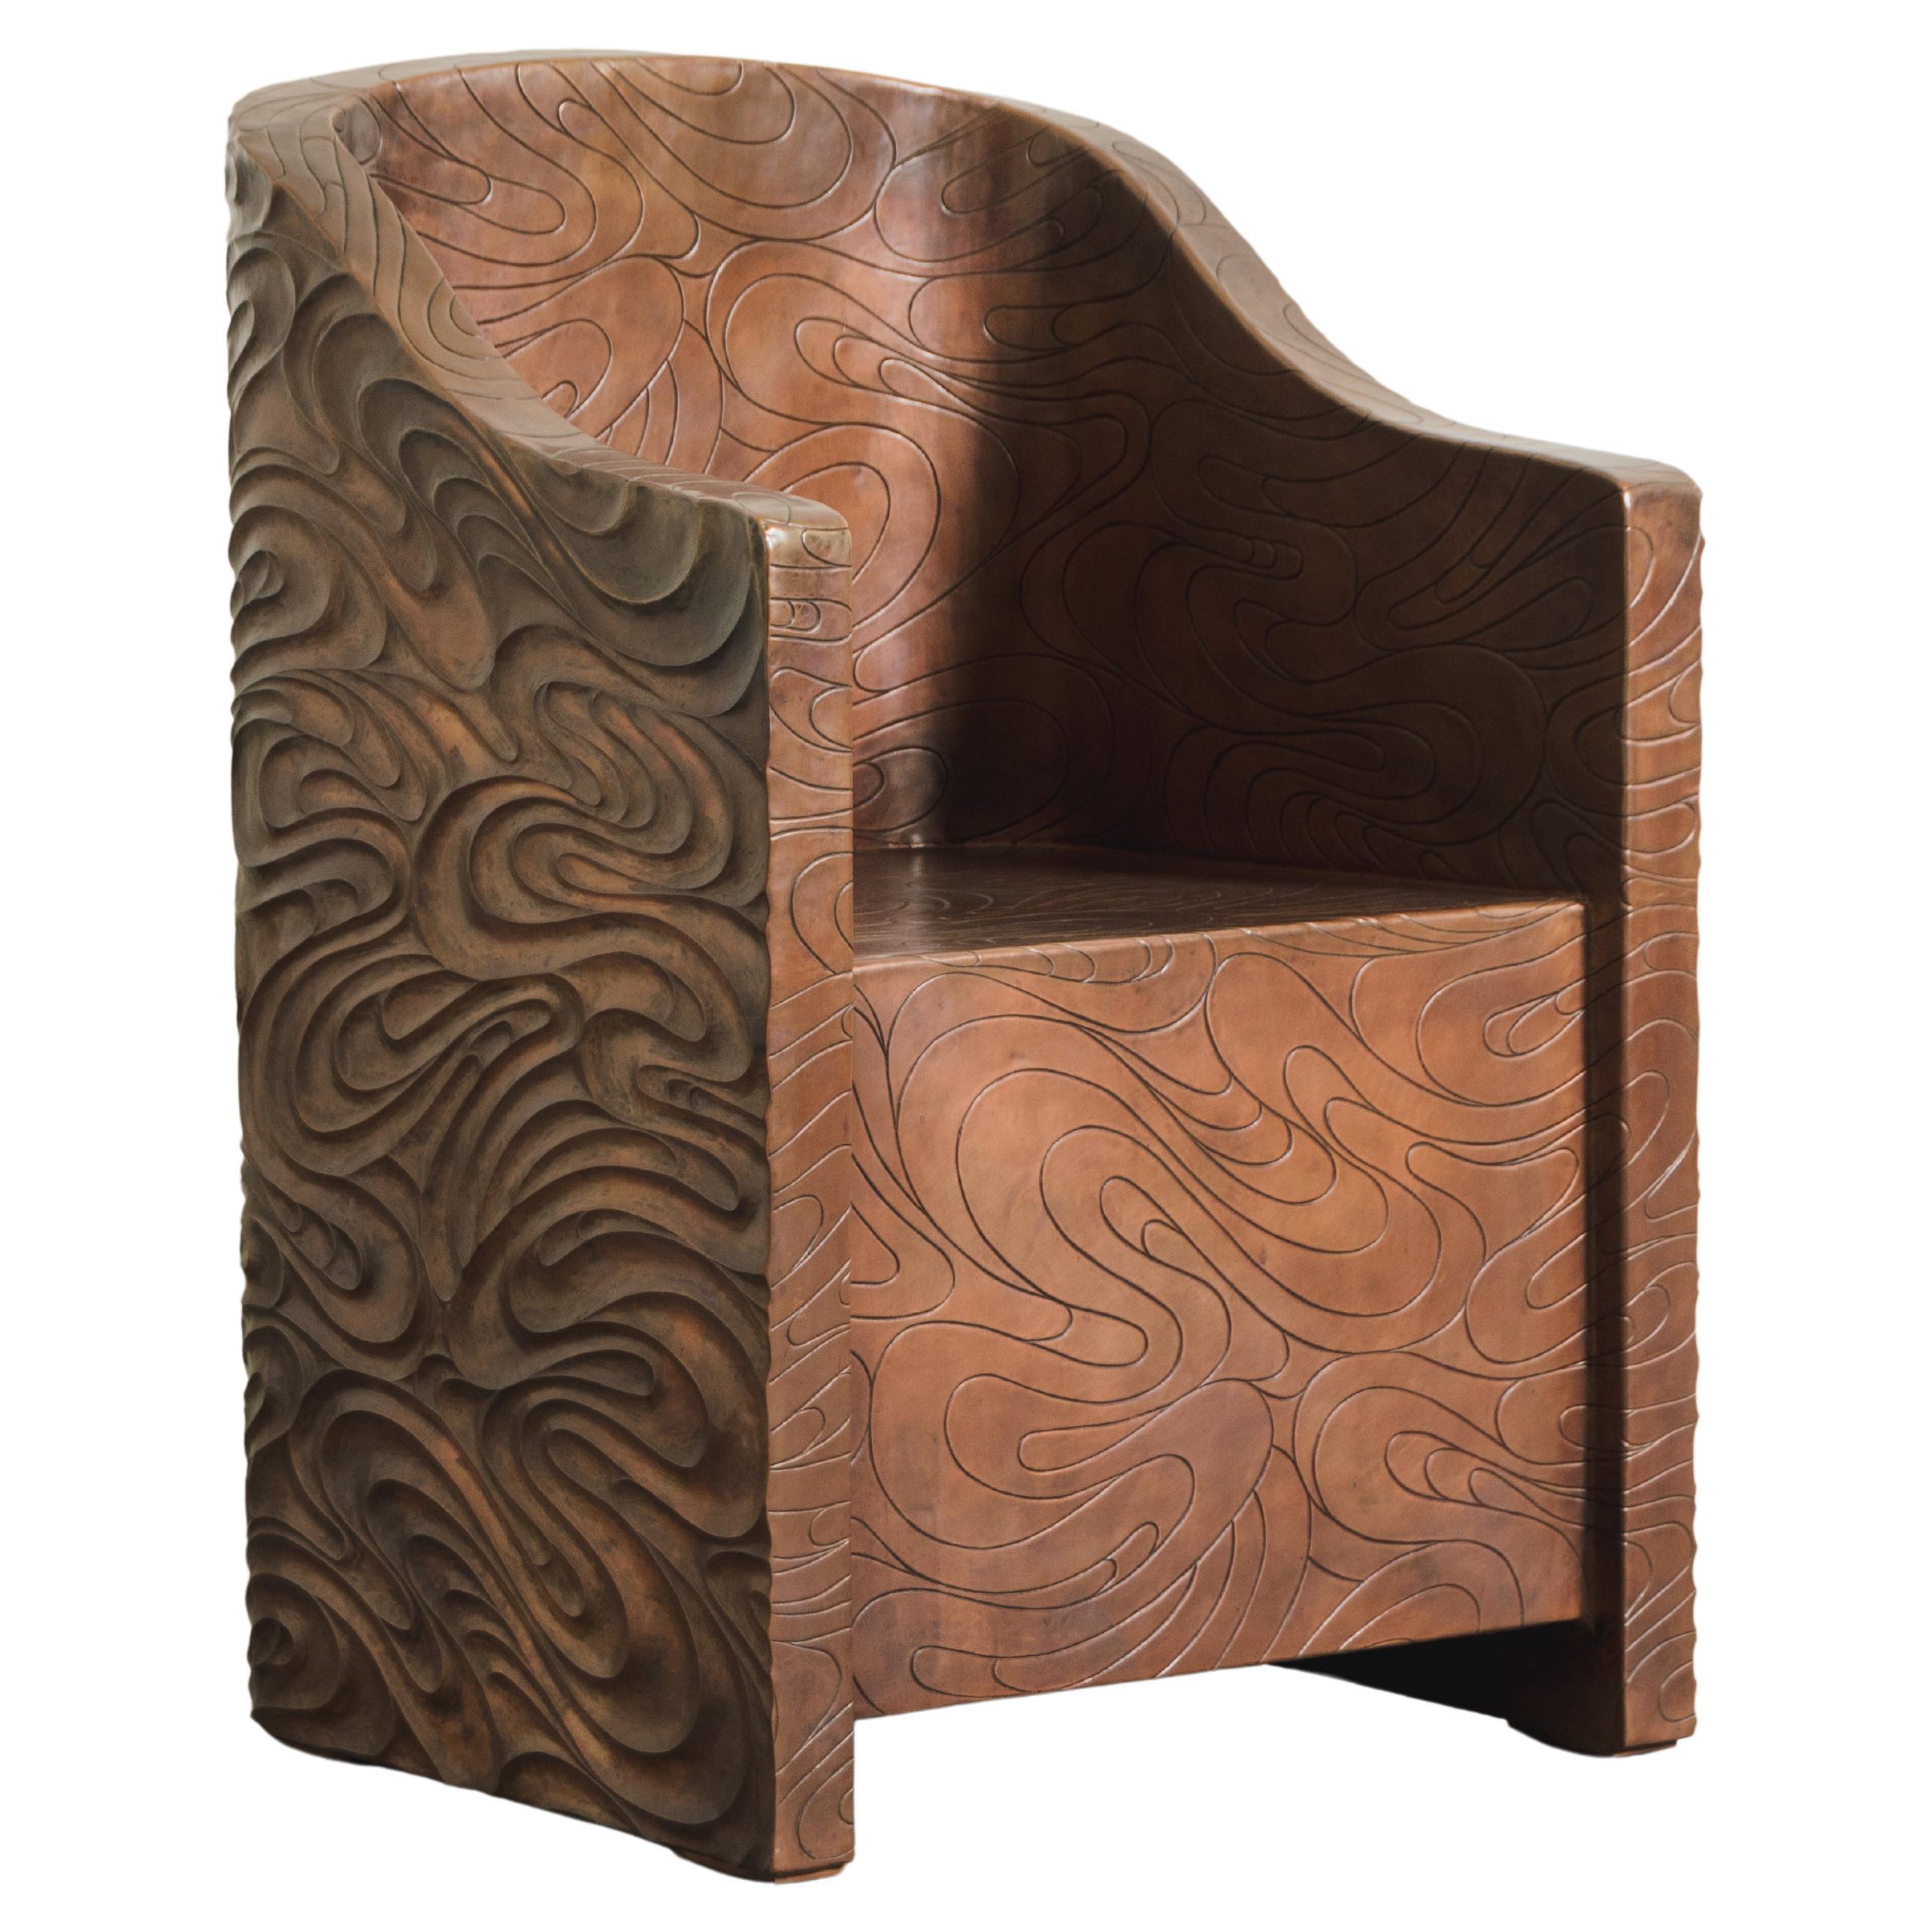 Contemporary Fei Tian Wen Chair in Repoussé Copper by Robert Kuo